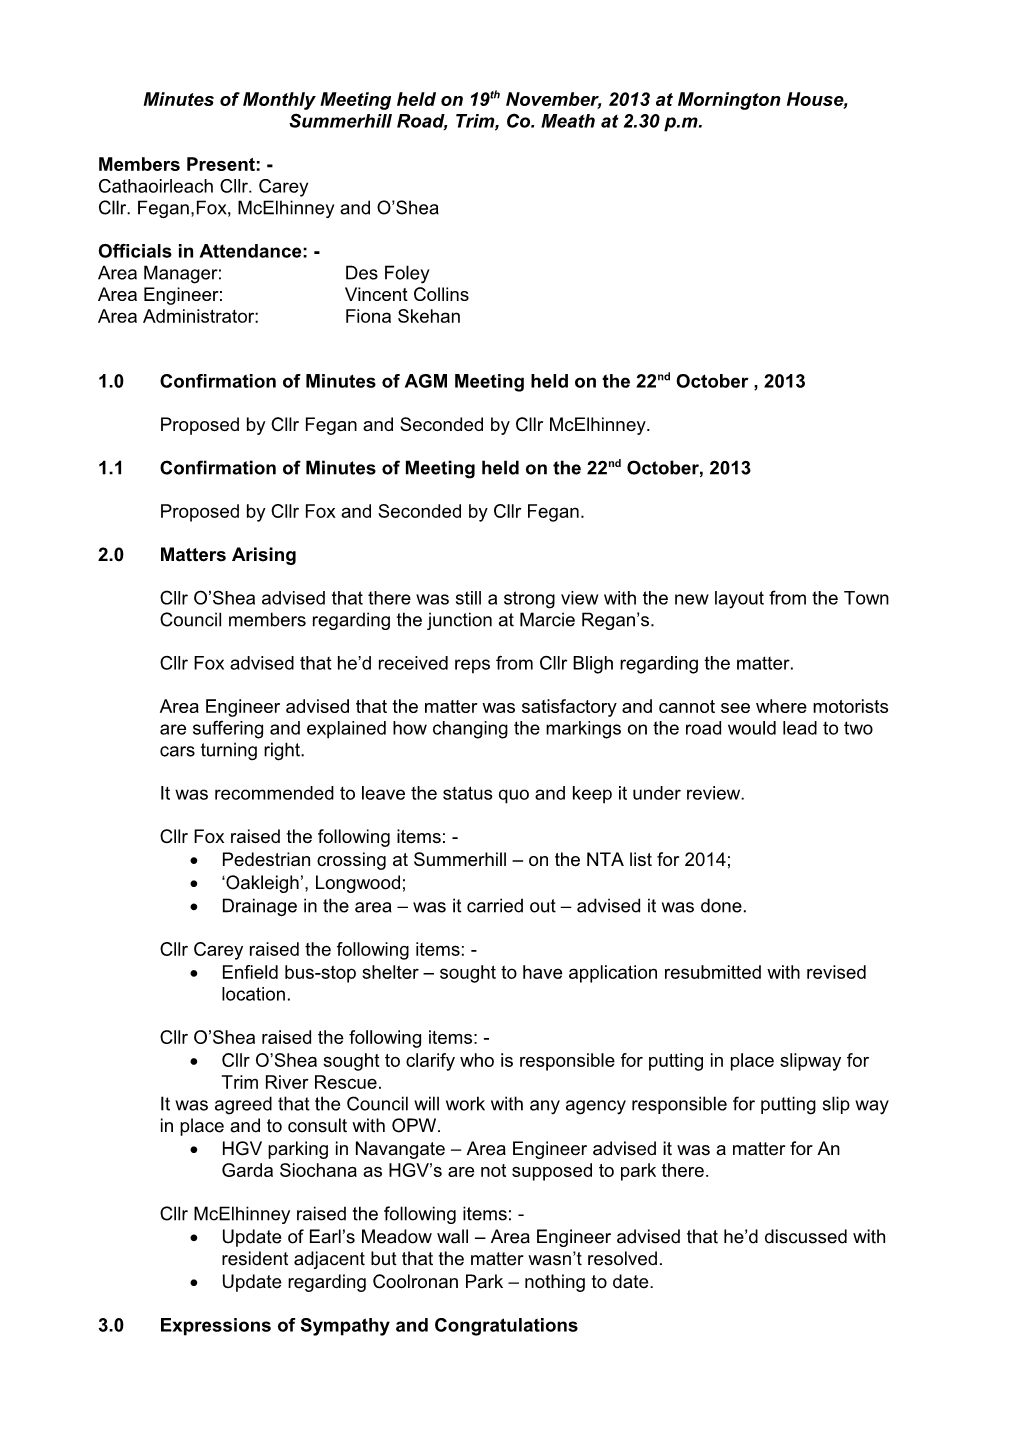 Minutes of Monthly Meeting Held on 19Th November 2012 at Mornington House, Summerhill Road